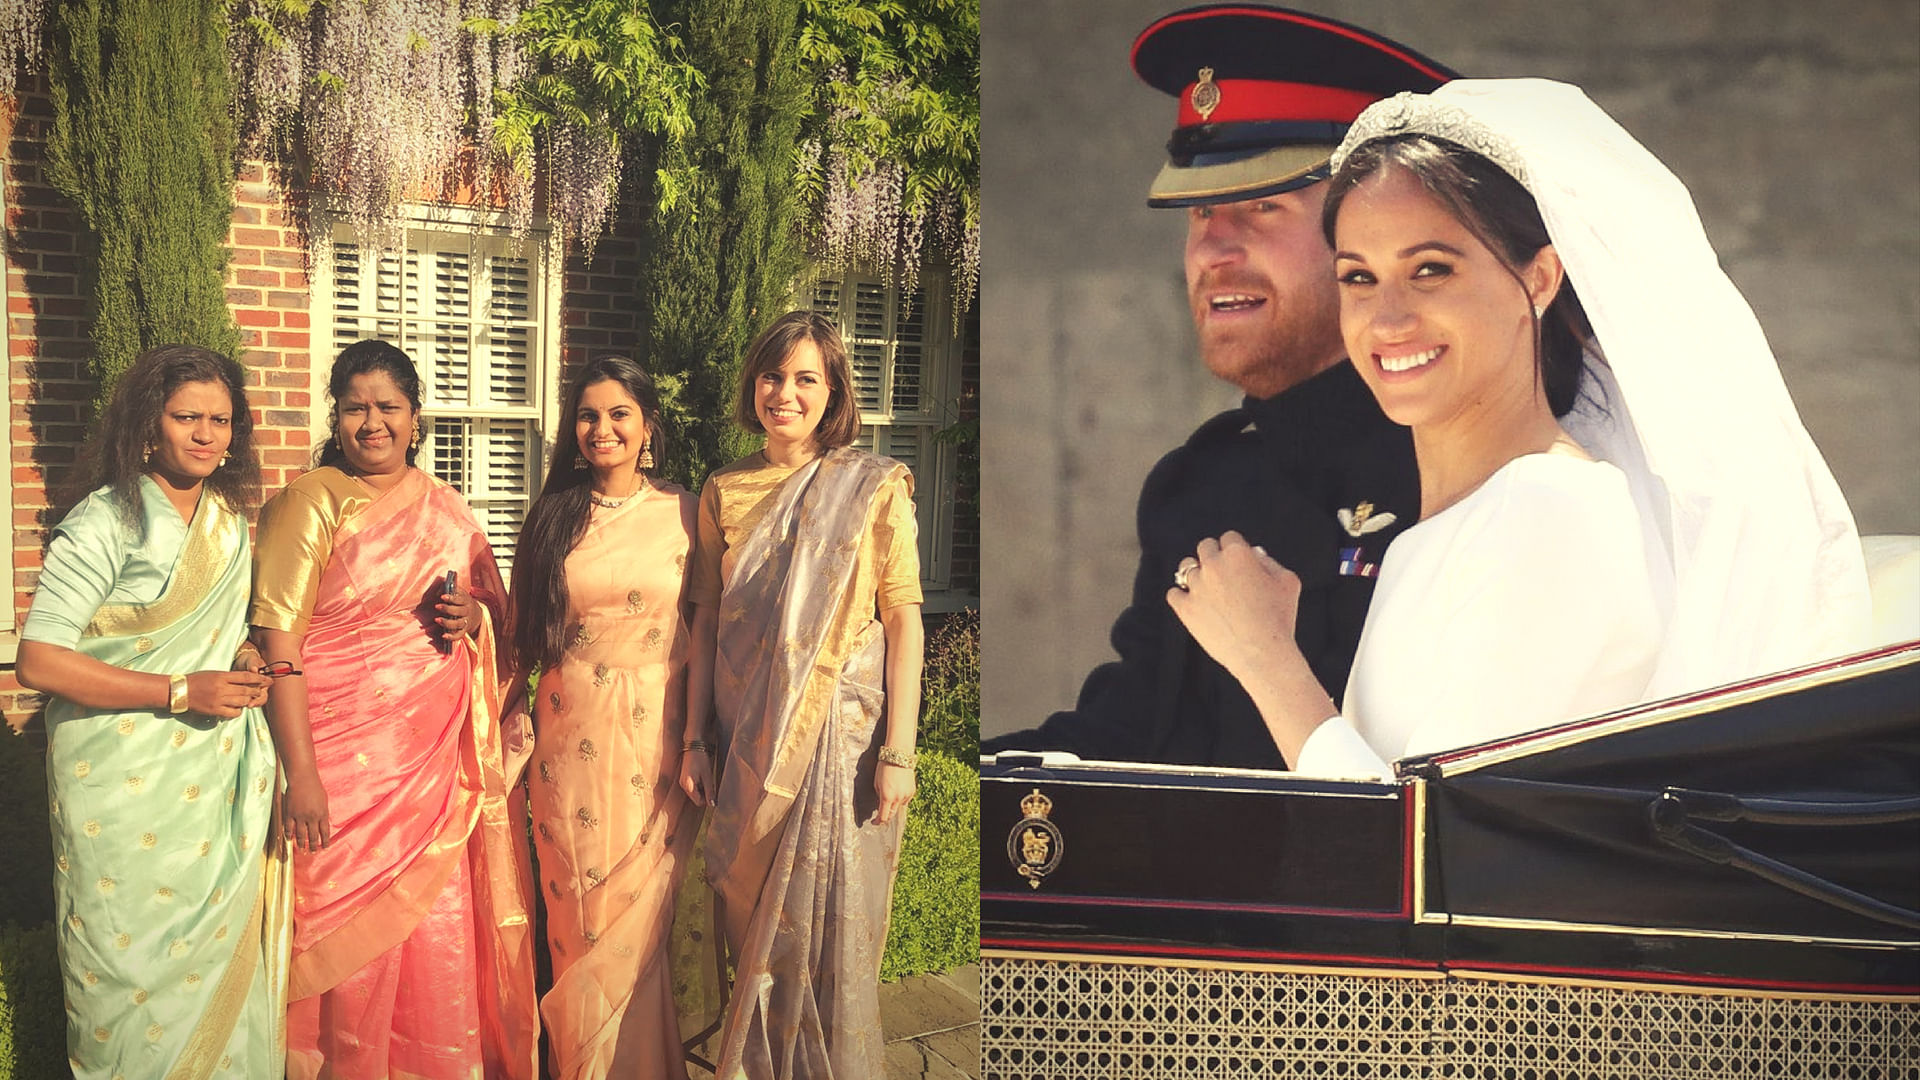 Suhani and her team wore sarees to the royal wedding (L); Prince Harry and Meghan after their wedding (R)